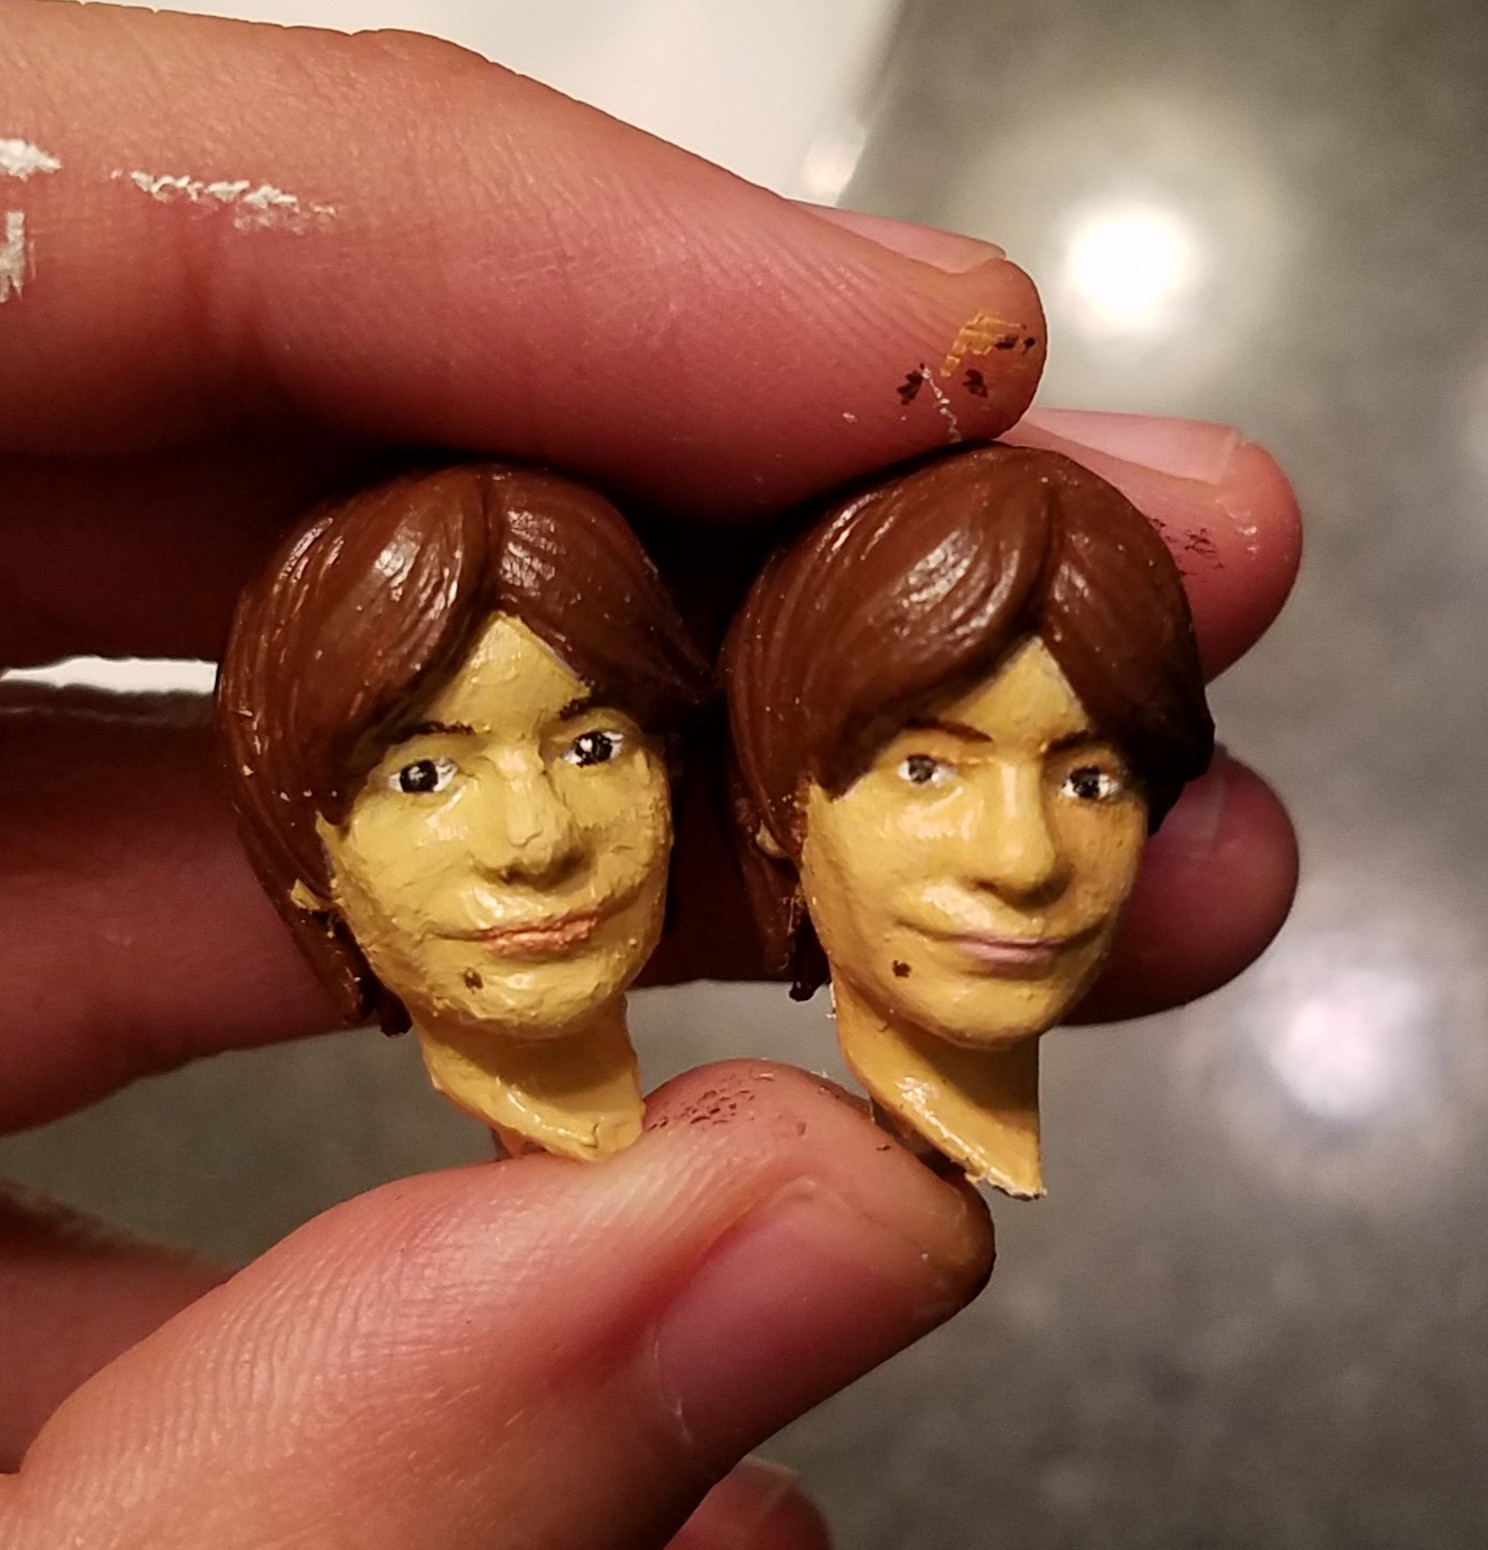 For Example this is the first and second head. Tried to paint the second one with thinner paints. I'm not much of a painter so shoutout to my girlfriend for helping me with this! The eyes were super tiny and were terrifying to paint...